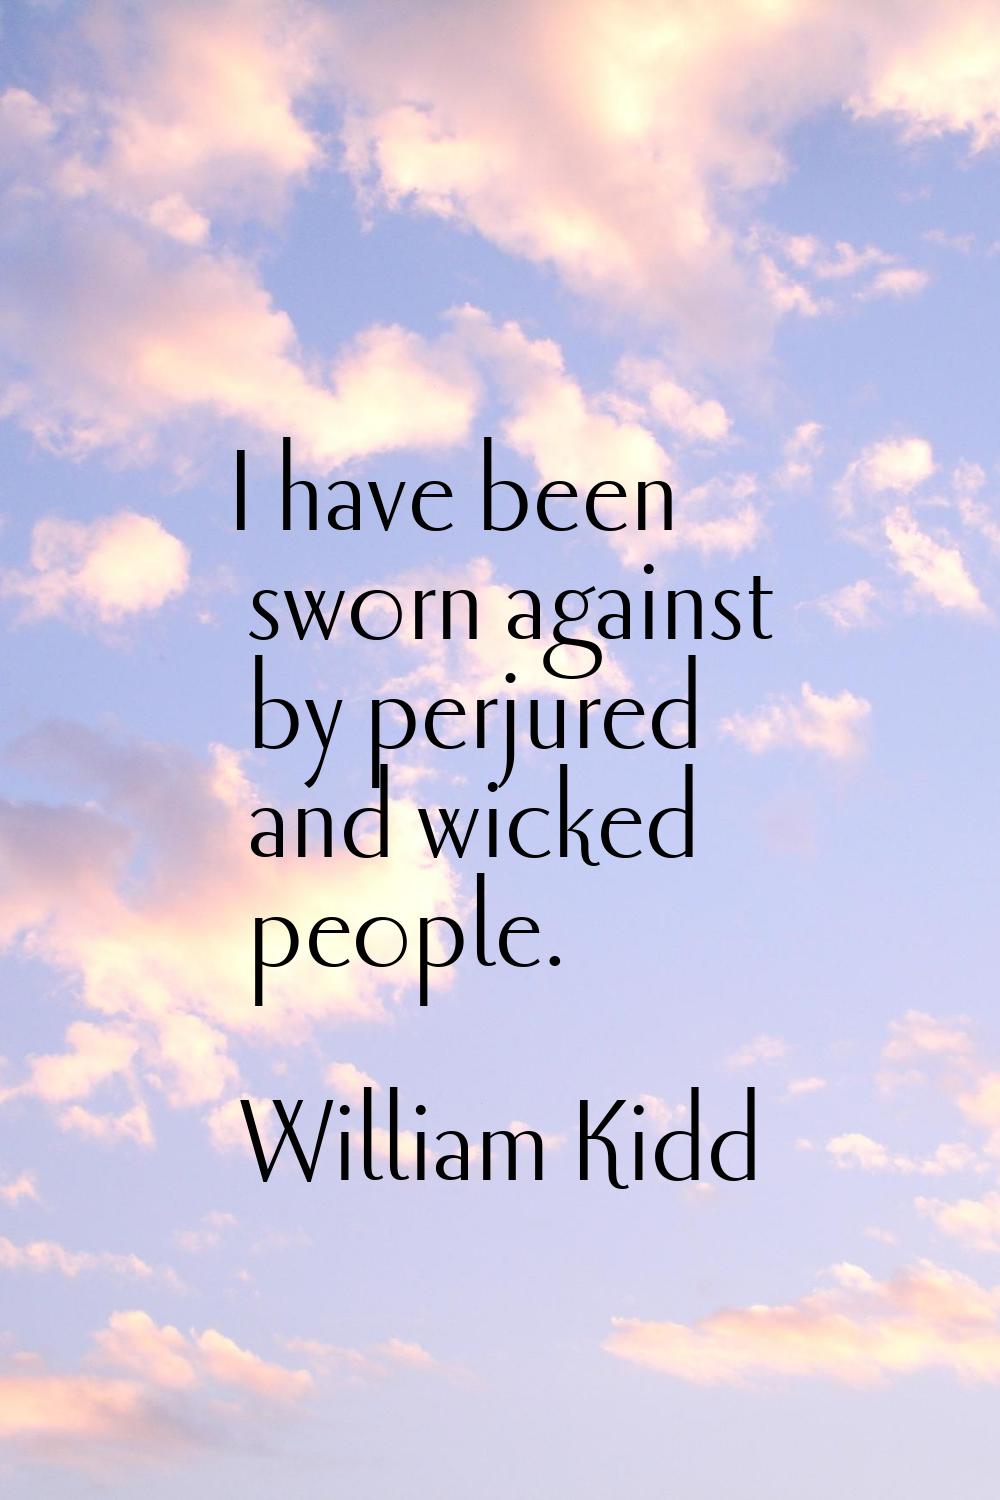 I have been sworn against by perjured and wicked people.